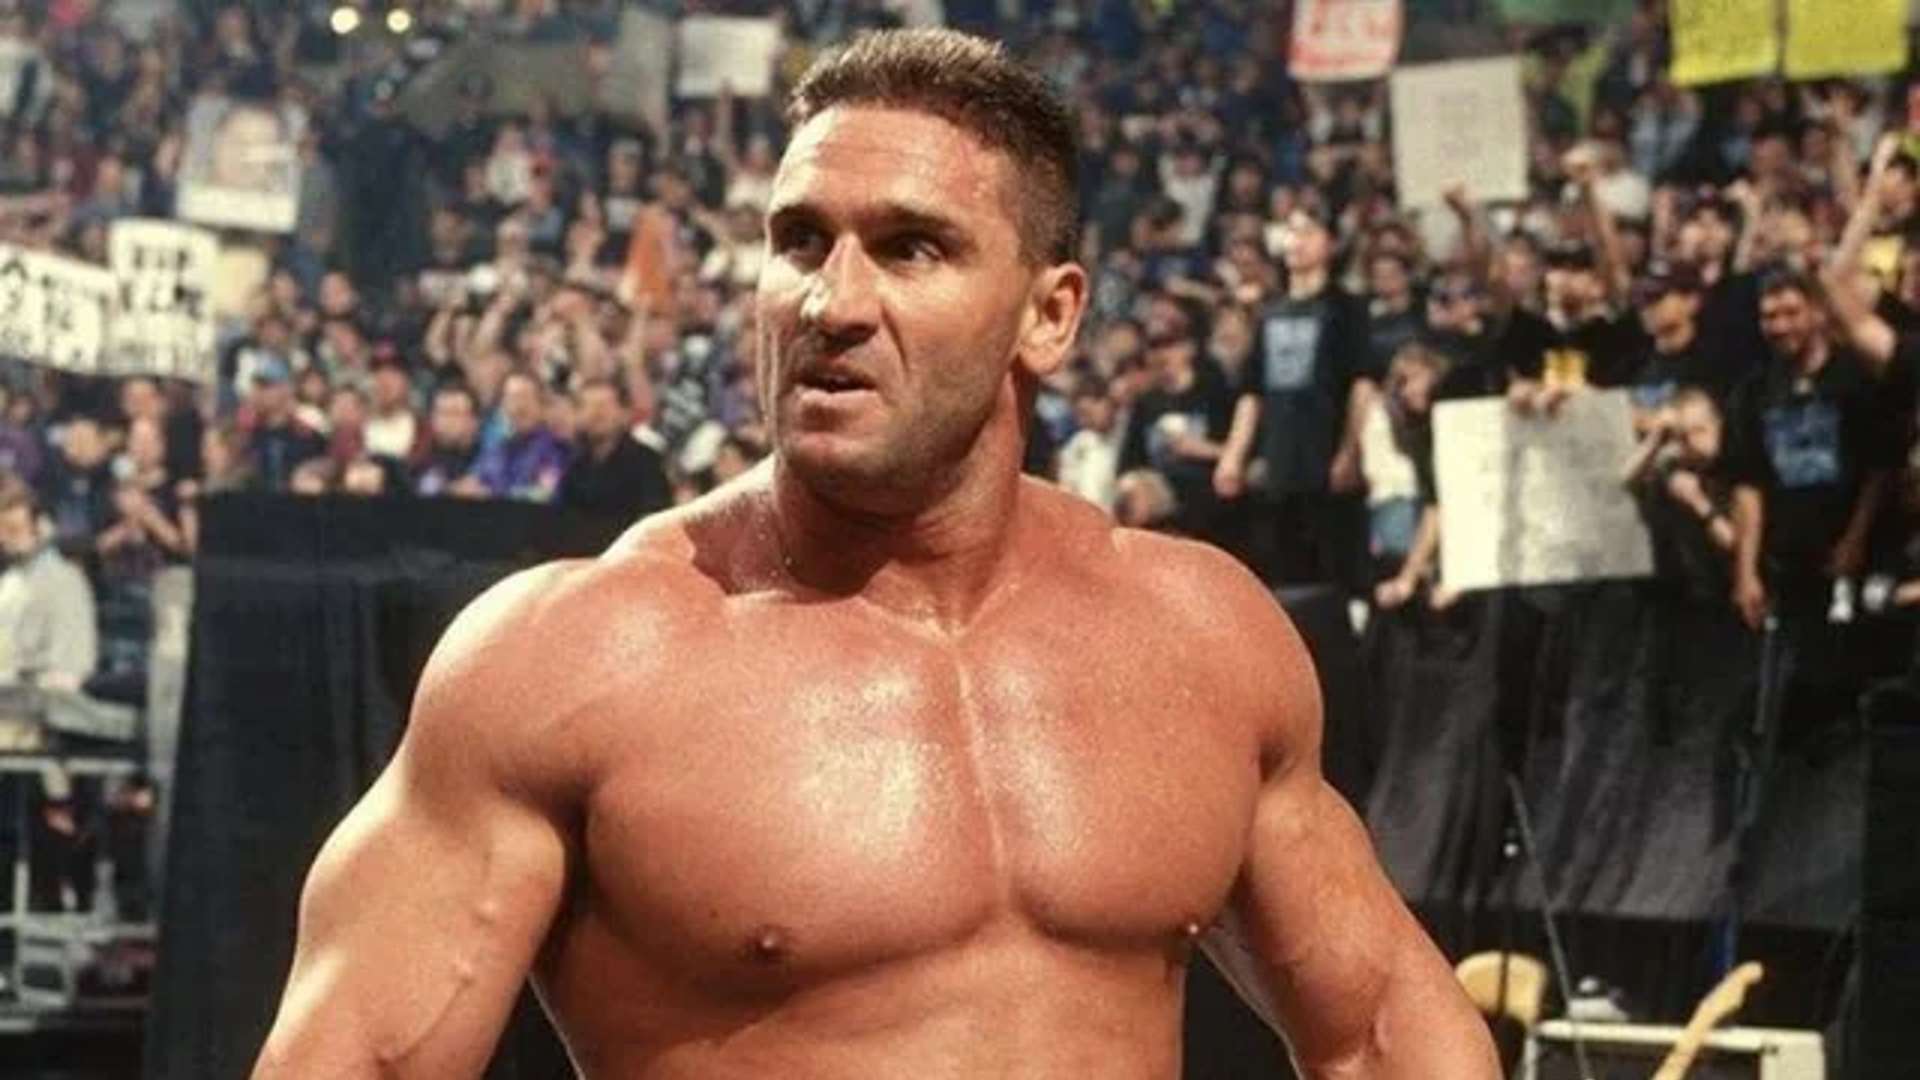  Ken Shamrock: Age, Height, Weight, Wife, Net Worth, Family, Injury Details, Tattoo, and Other Unknown Facts 